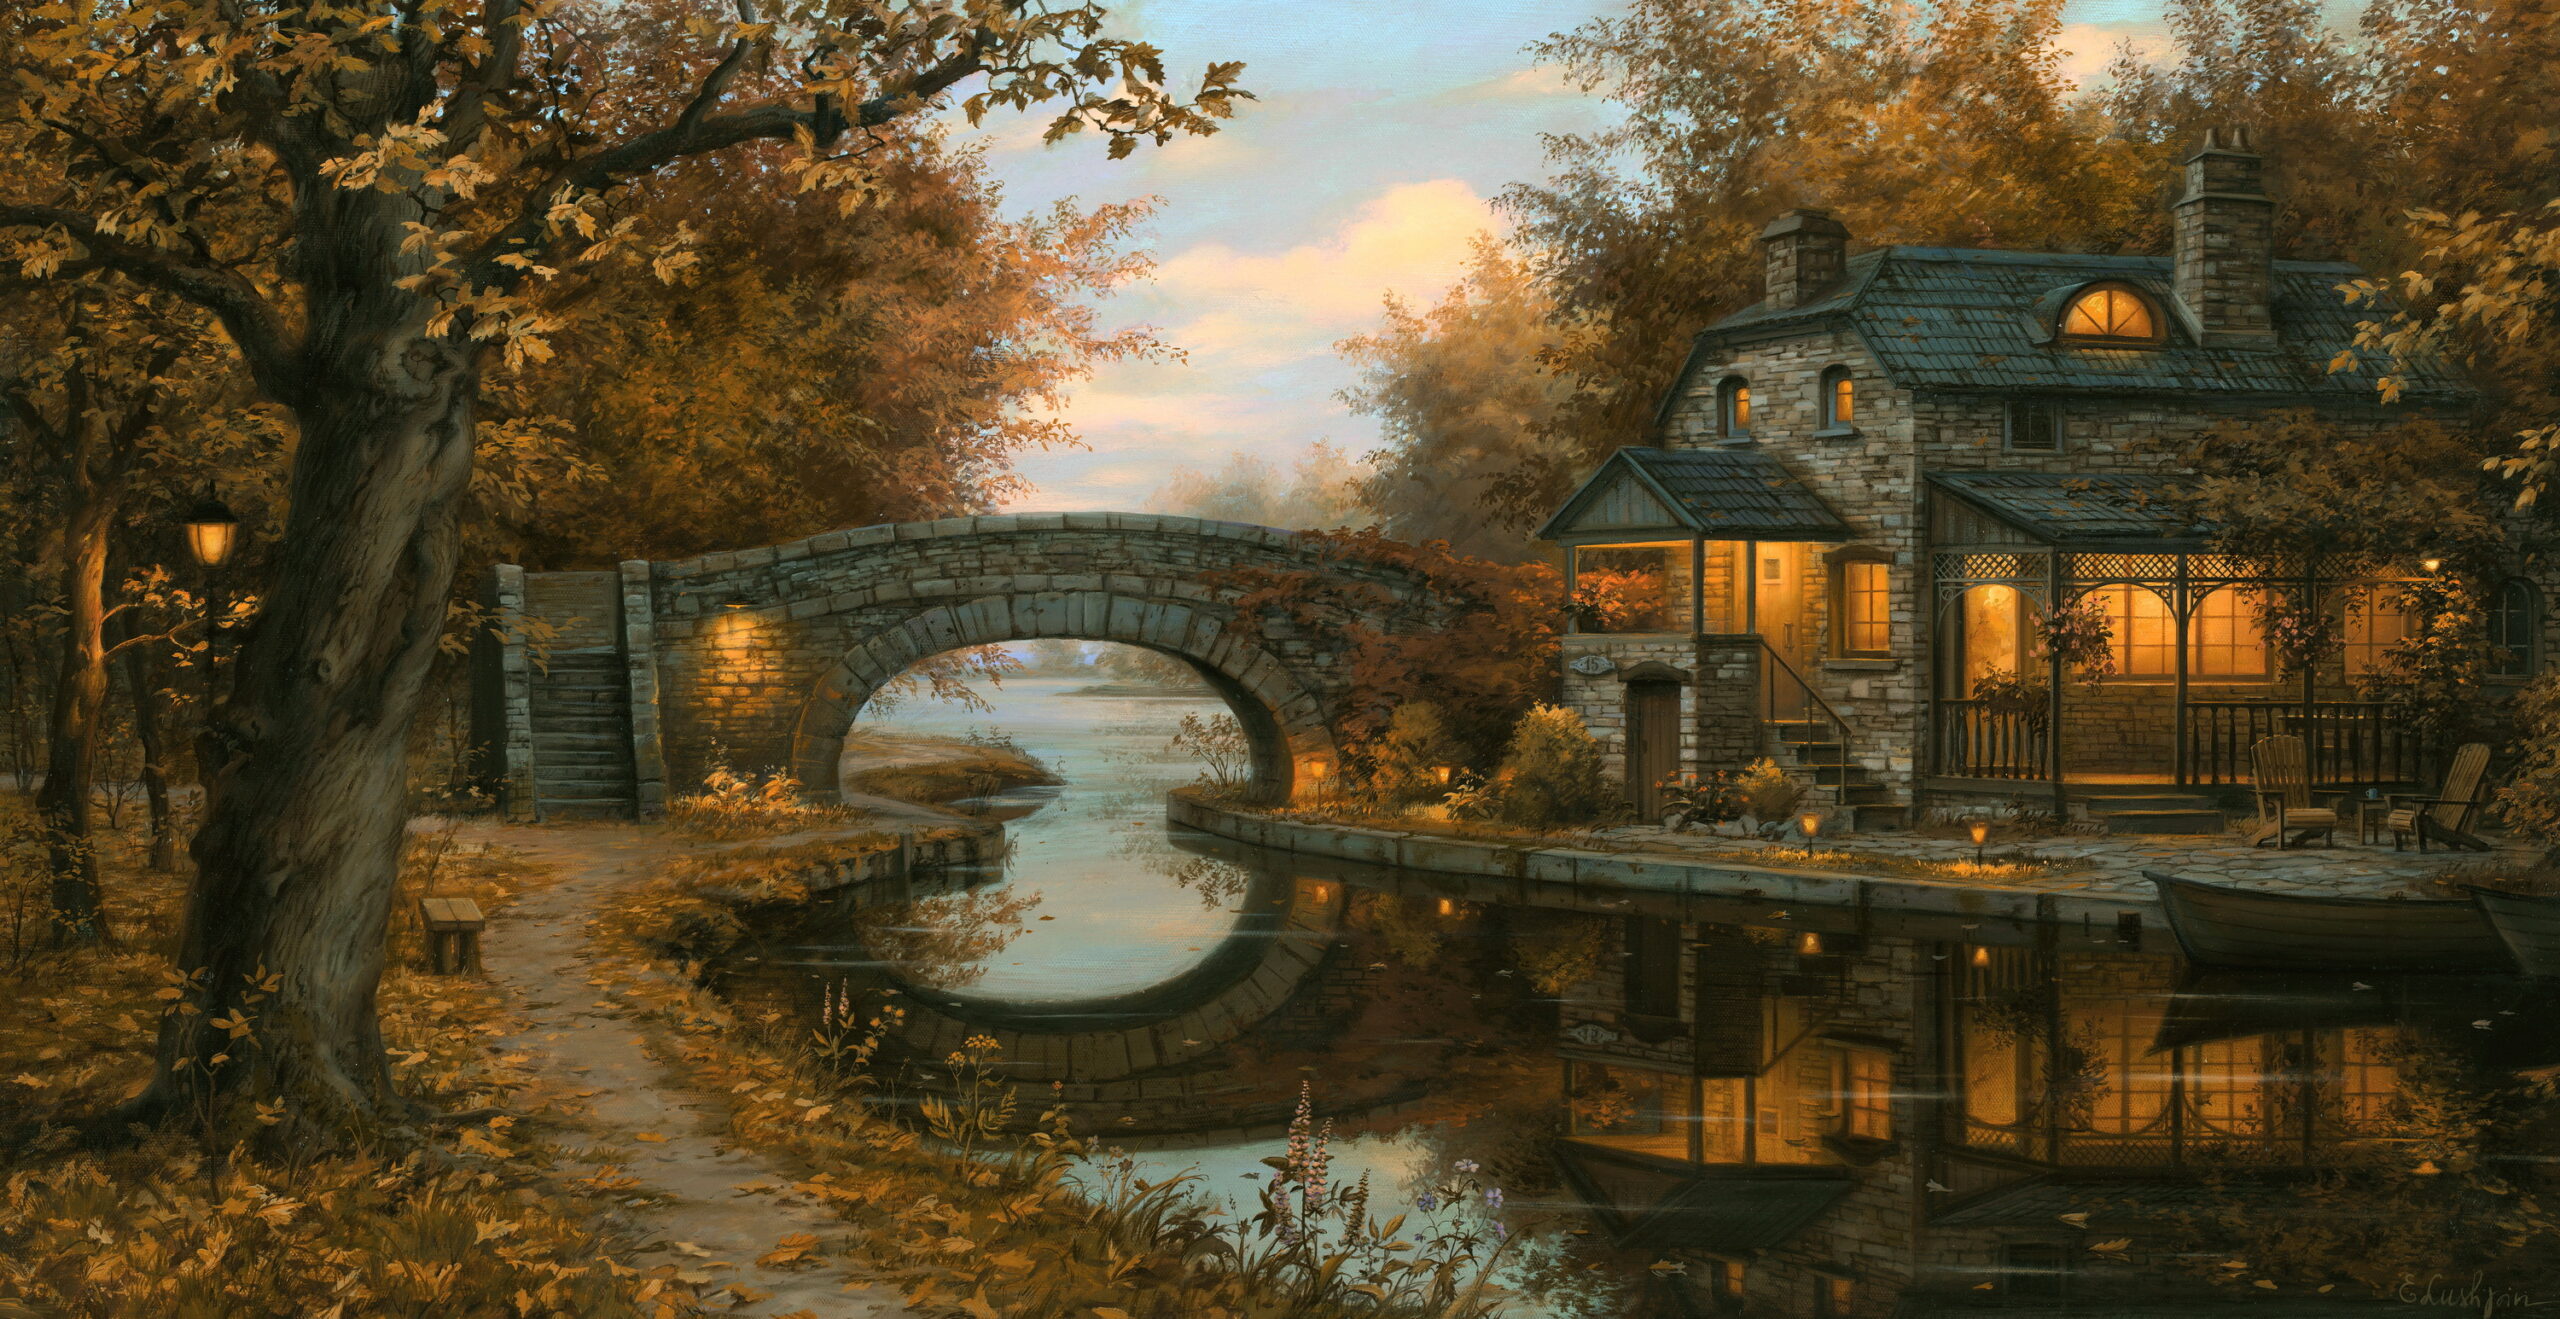 Tranquility by Evgeny Lushpin